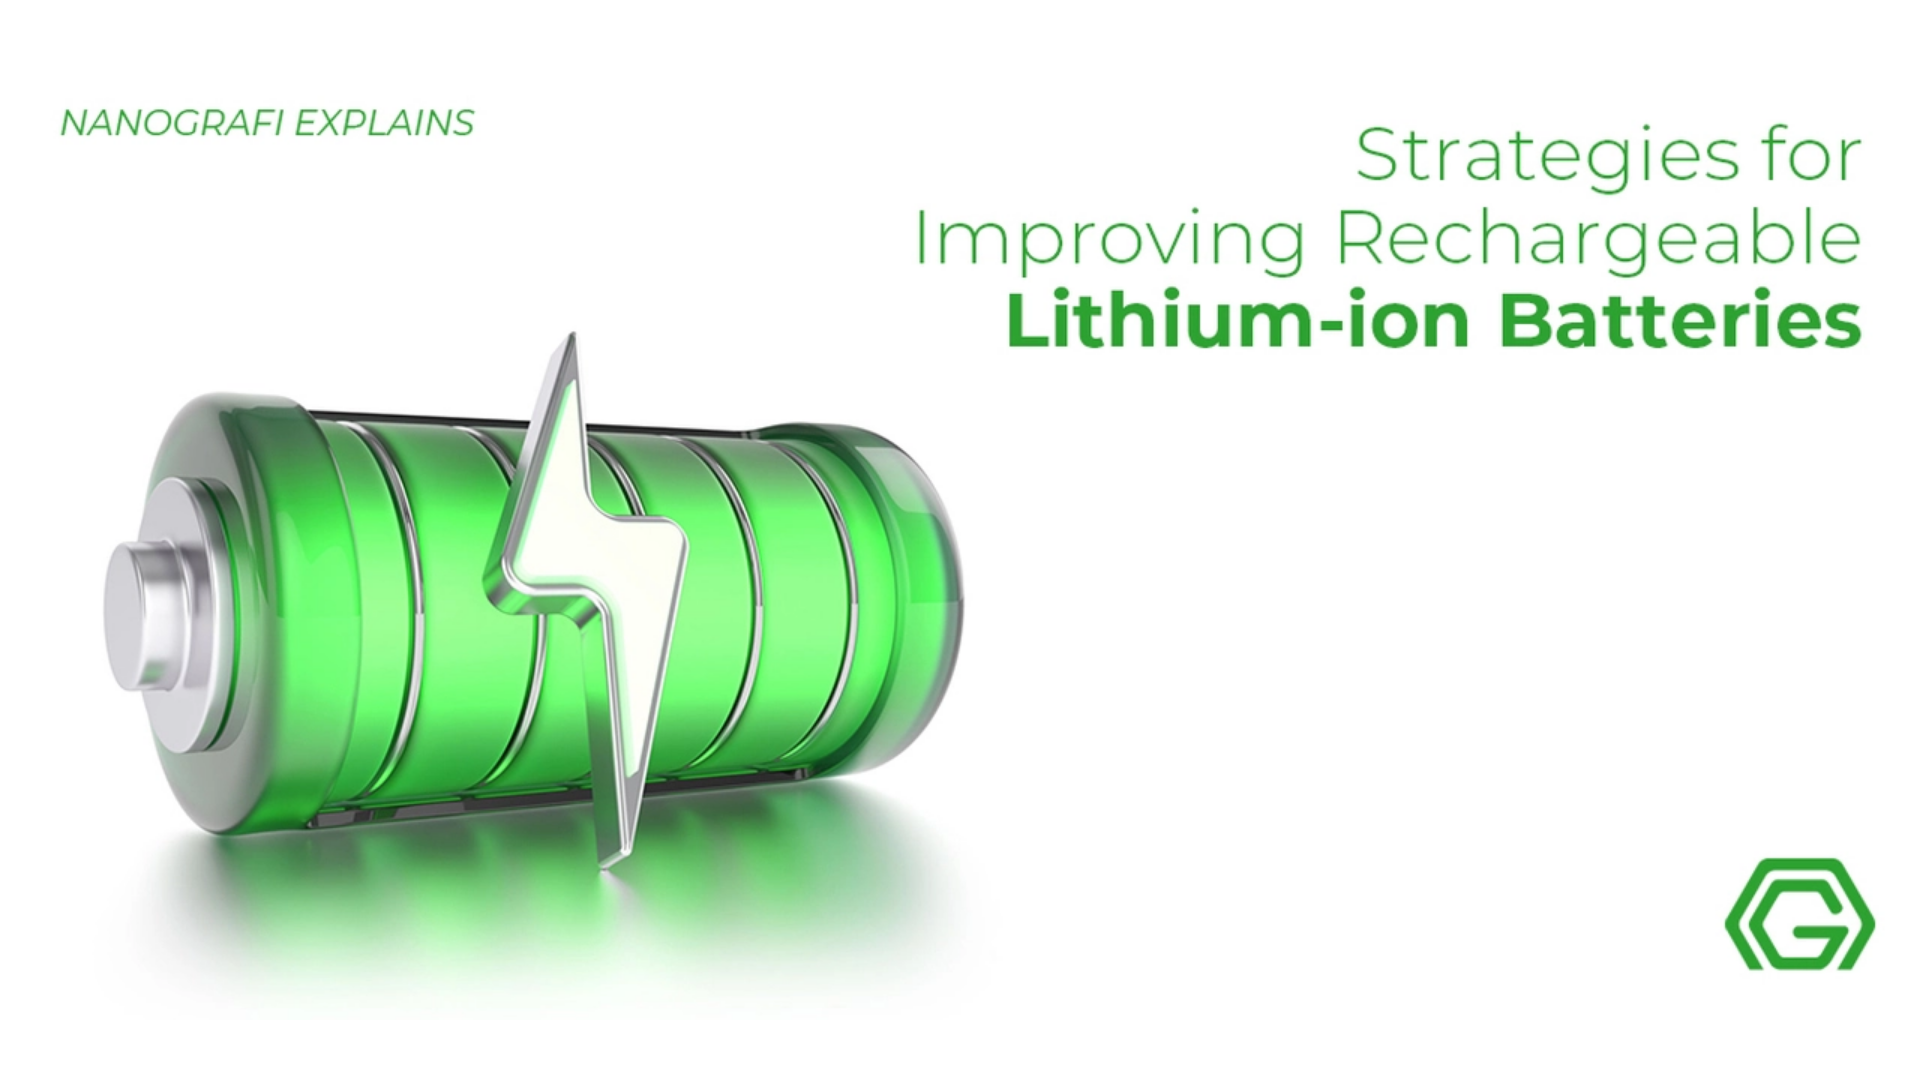 Strategies for improving rechargeable Lithium-ion Batteries,